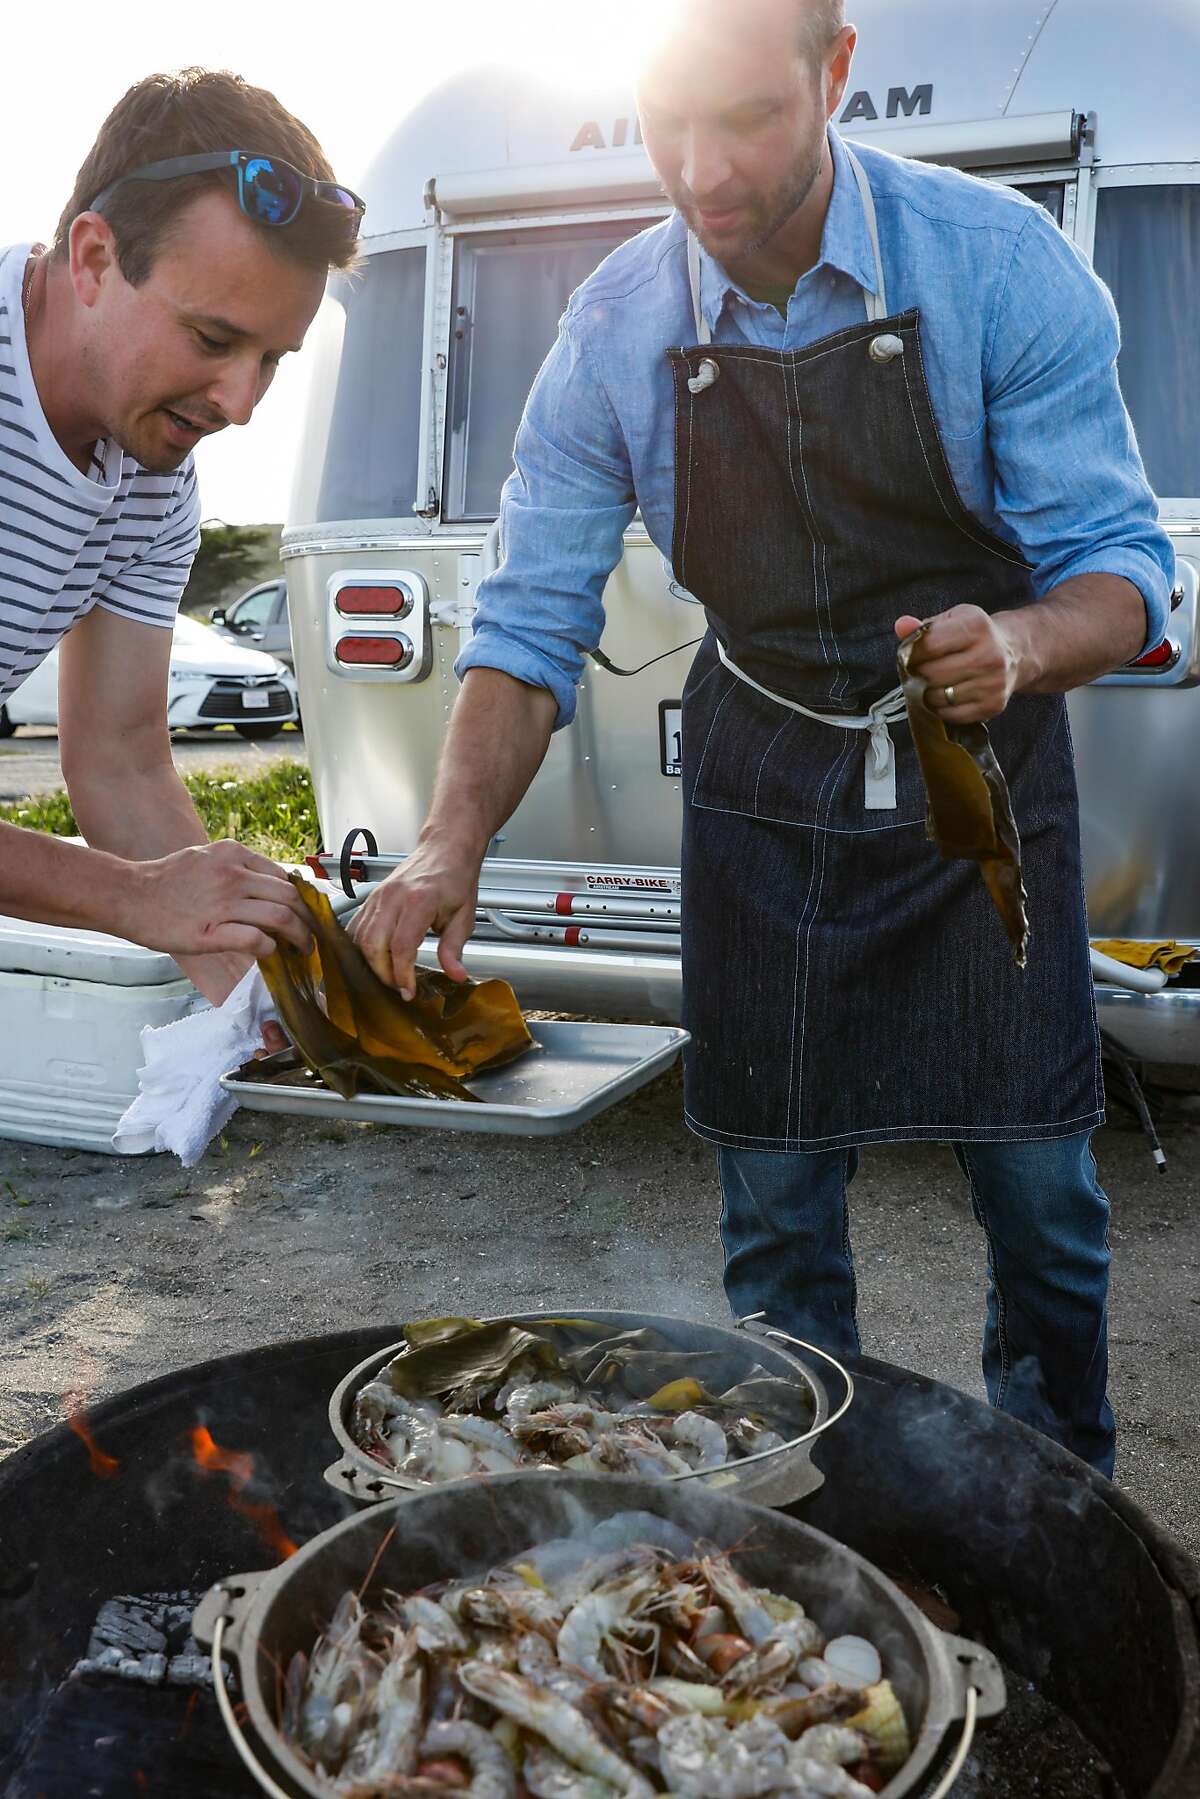 Chef de cuisine Robert Dort and Chef Ethan Mantle of Componere Catering lay seaweed on top of California Clambake with Monterey clams, head-on shrimp, sausage, corn potatoes on Monday, April 9, 2018 in Bodega Bay, Calif.